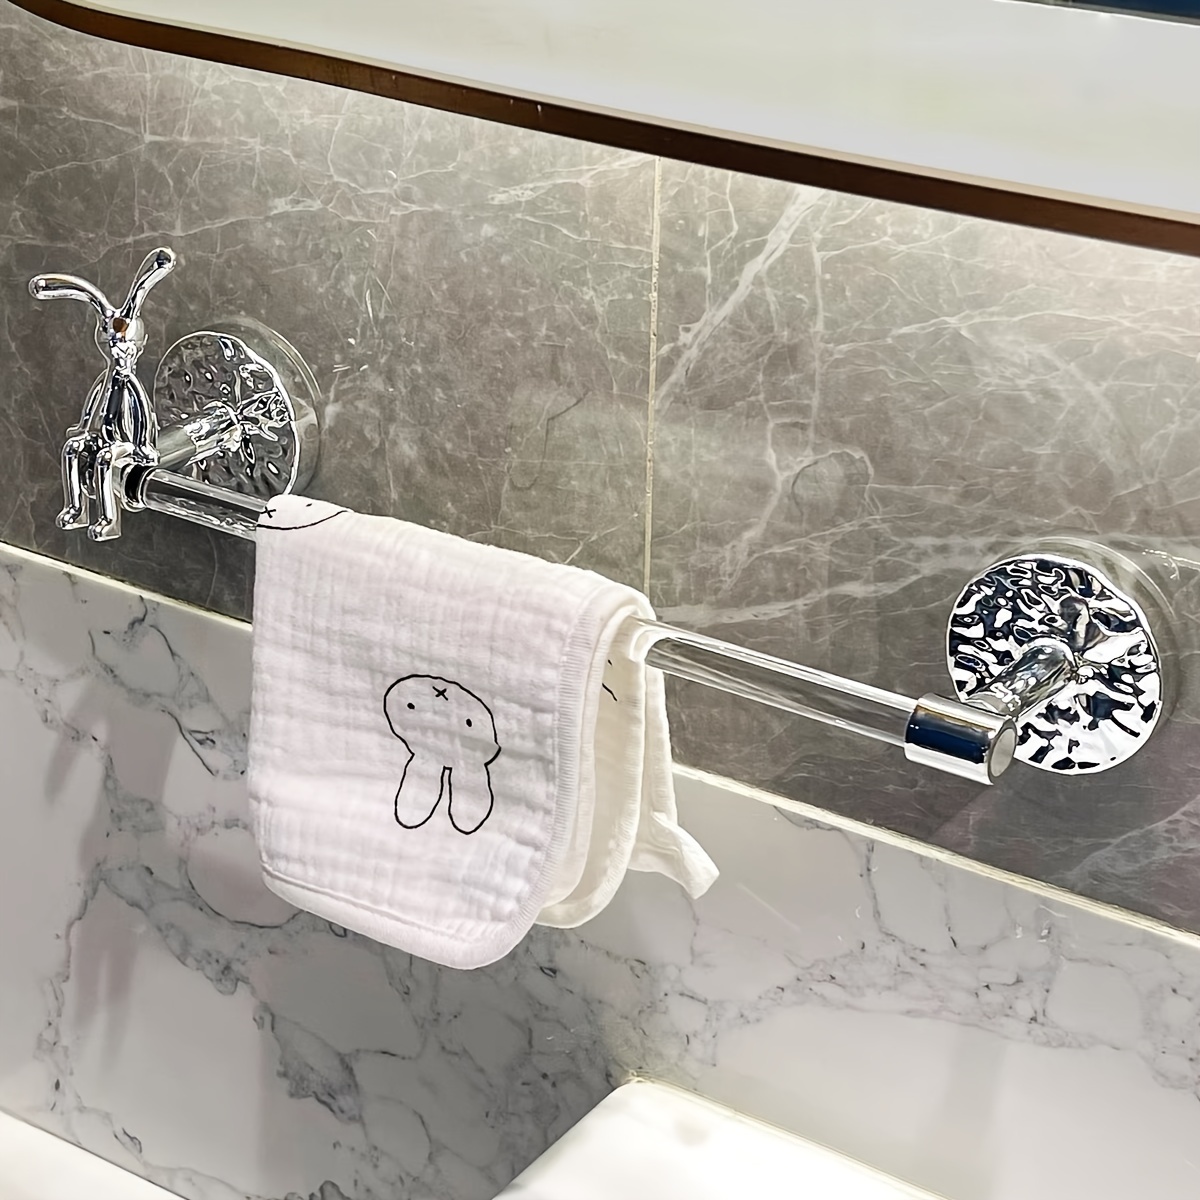 art deco silver rabbit towel rack wall mounted bathroom towel holder no drill design 30cm length decorative and functional towel storage bar for home use single or double holder options available